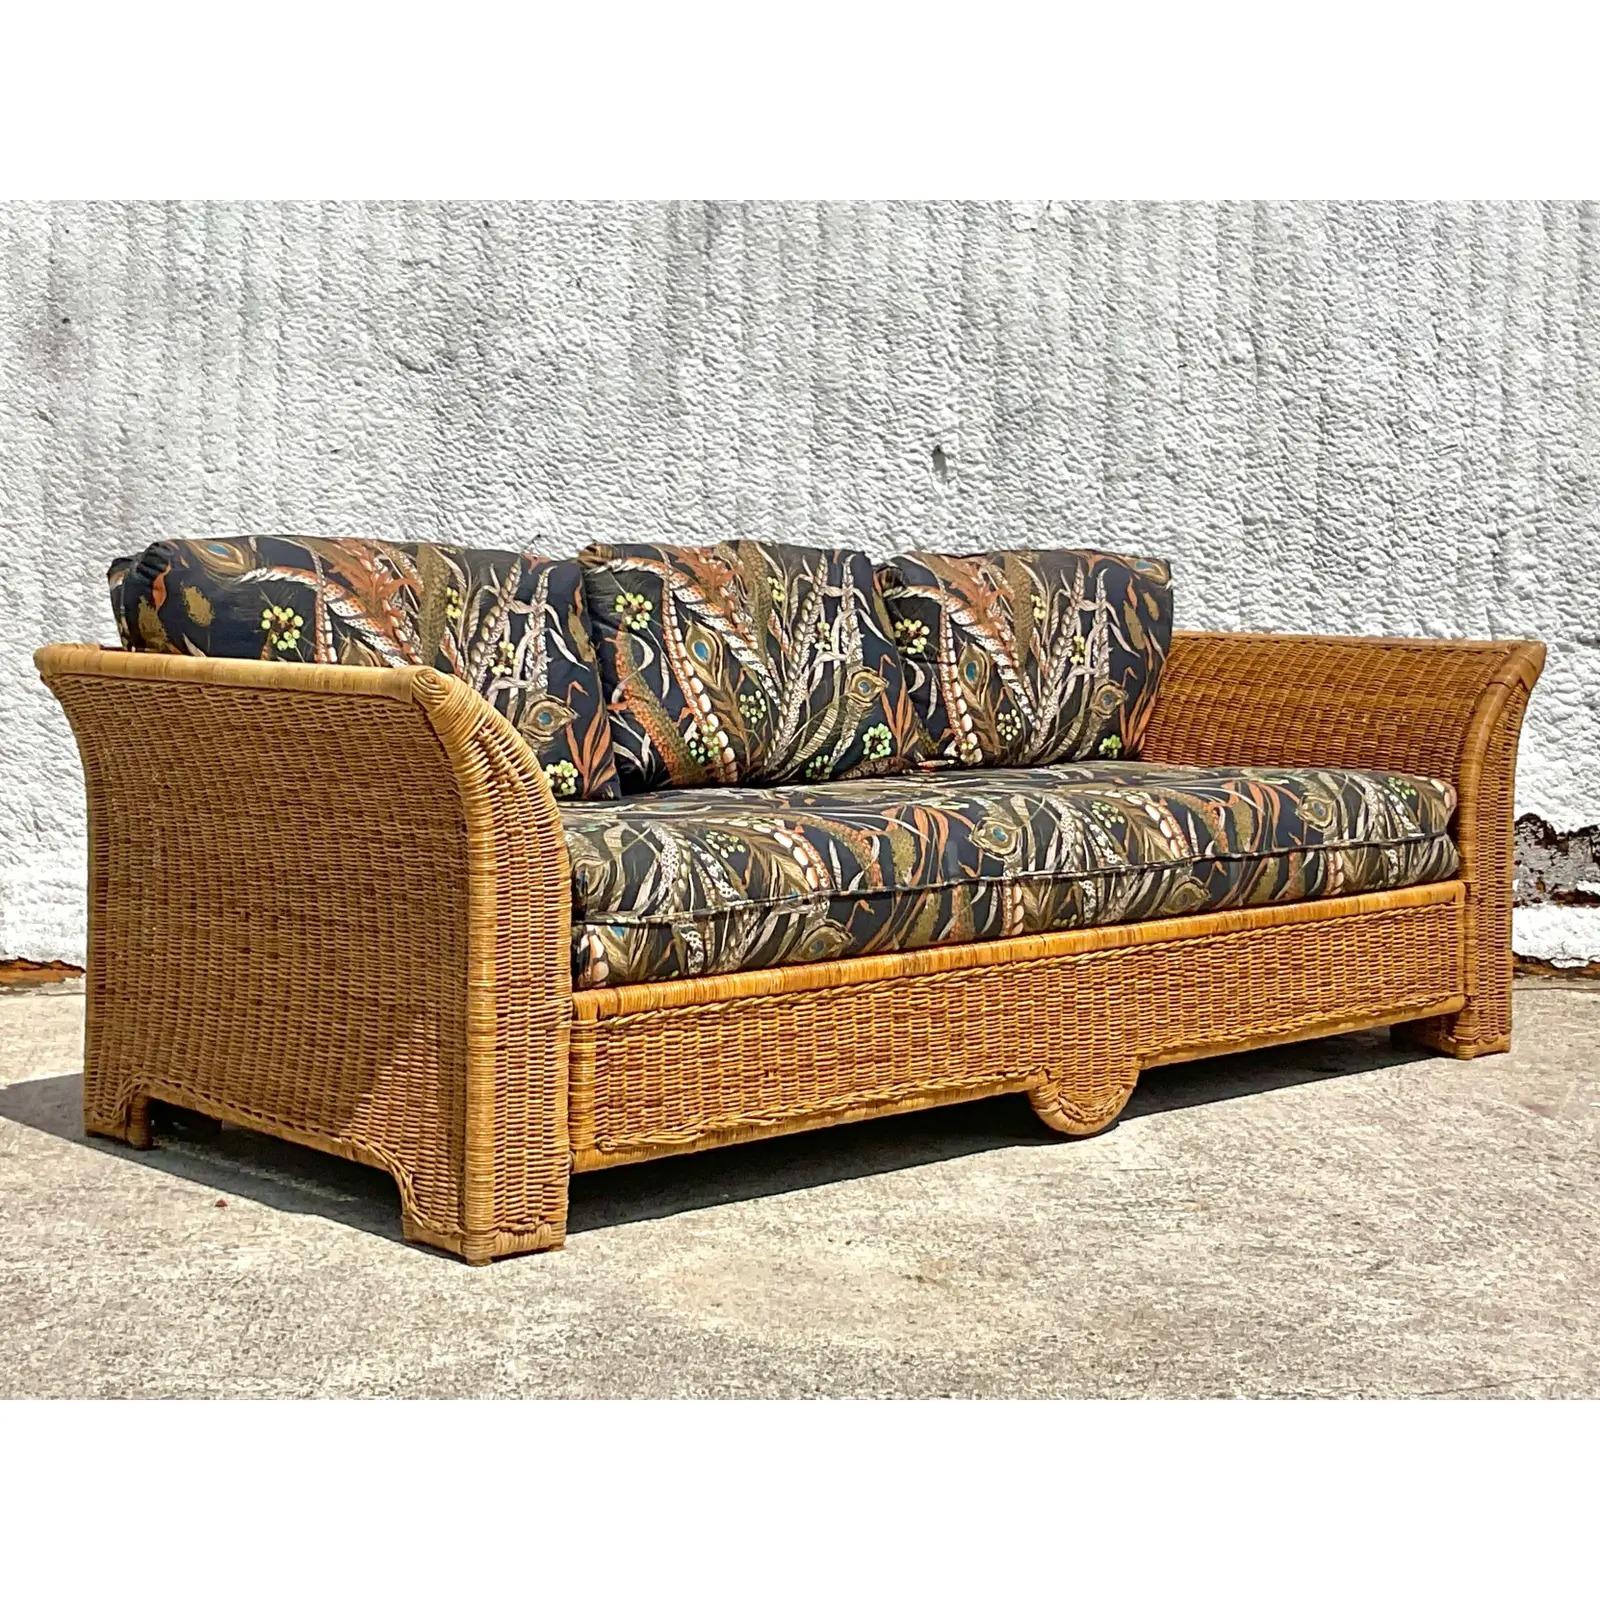 A fantastic vintage Coastal sofa. A chic woven rattan with a covered back and bat wing design. A printed polished cotton upholstery that’s in great shape. Acquired from a Palm Beach estate.